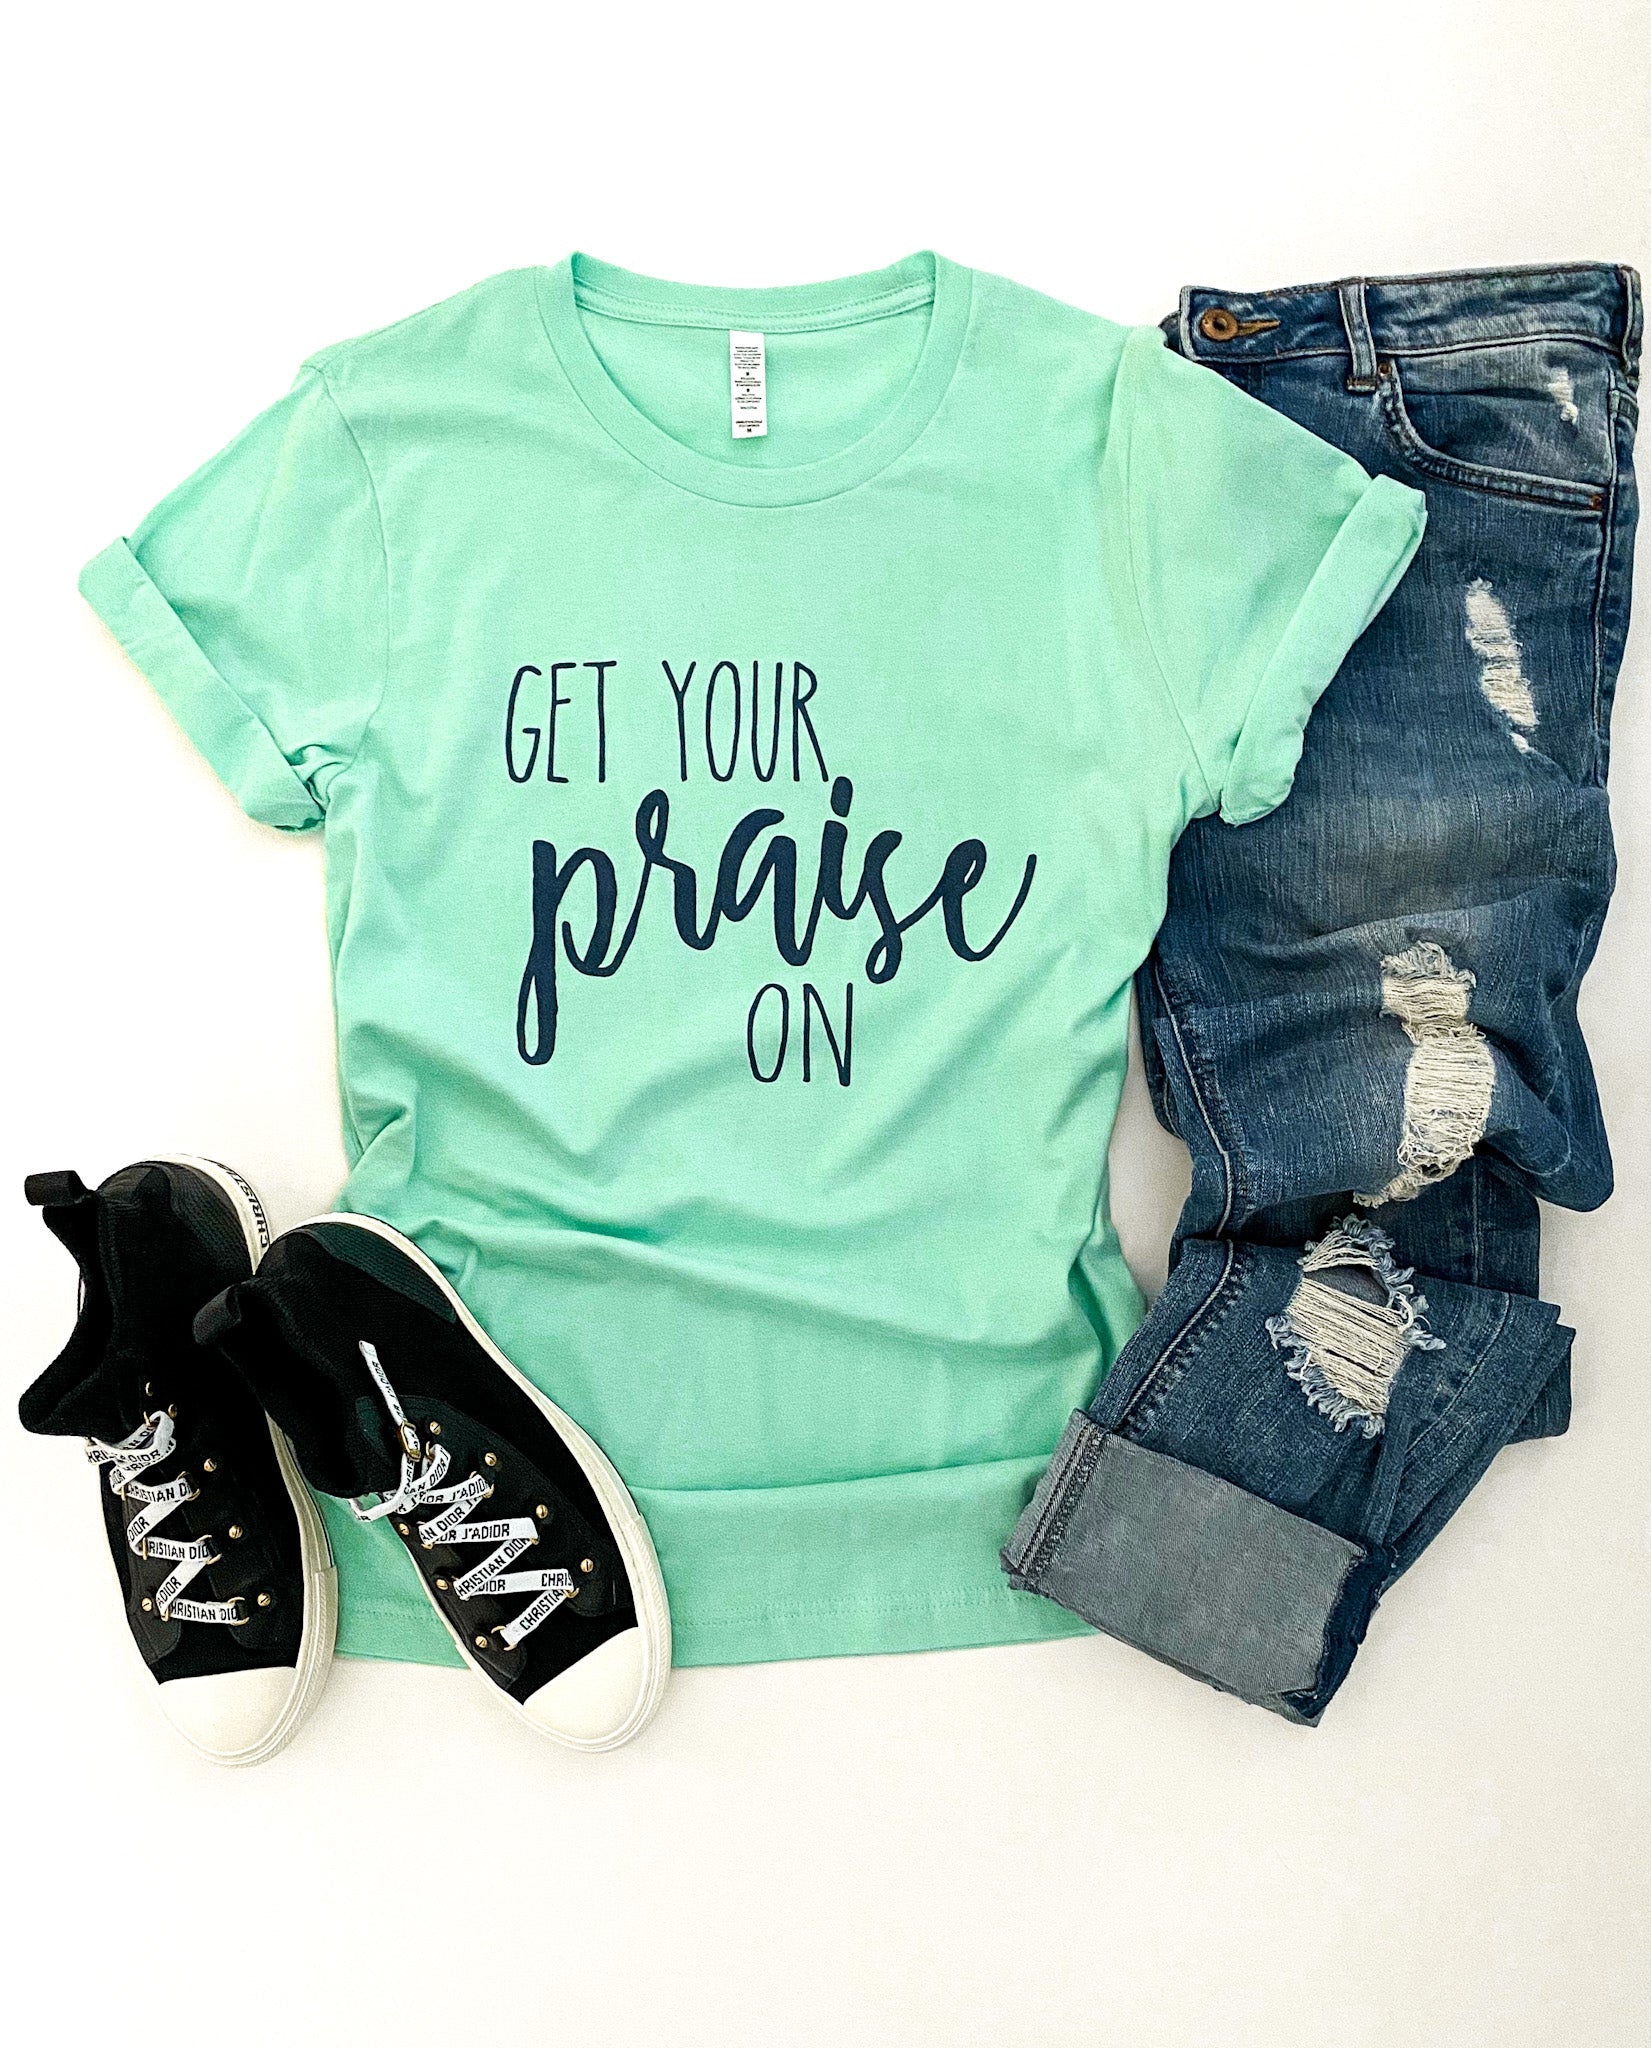 Get your praise on tee Short sleeve miscellaneous tee Bella Canvas 3001 